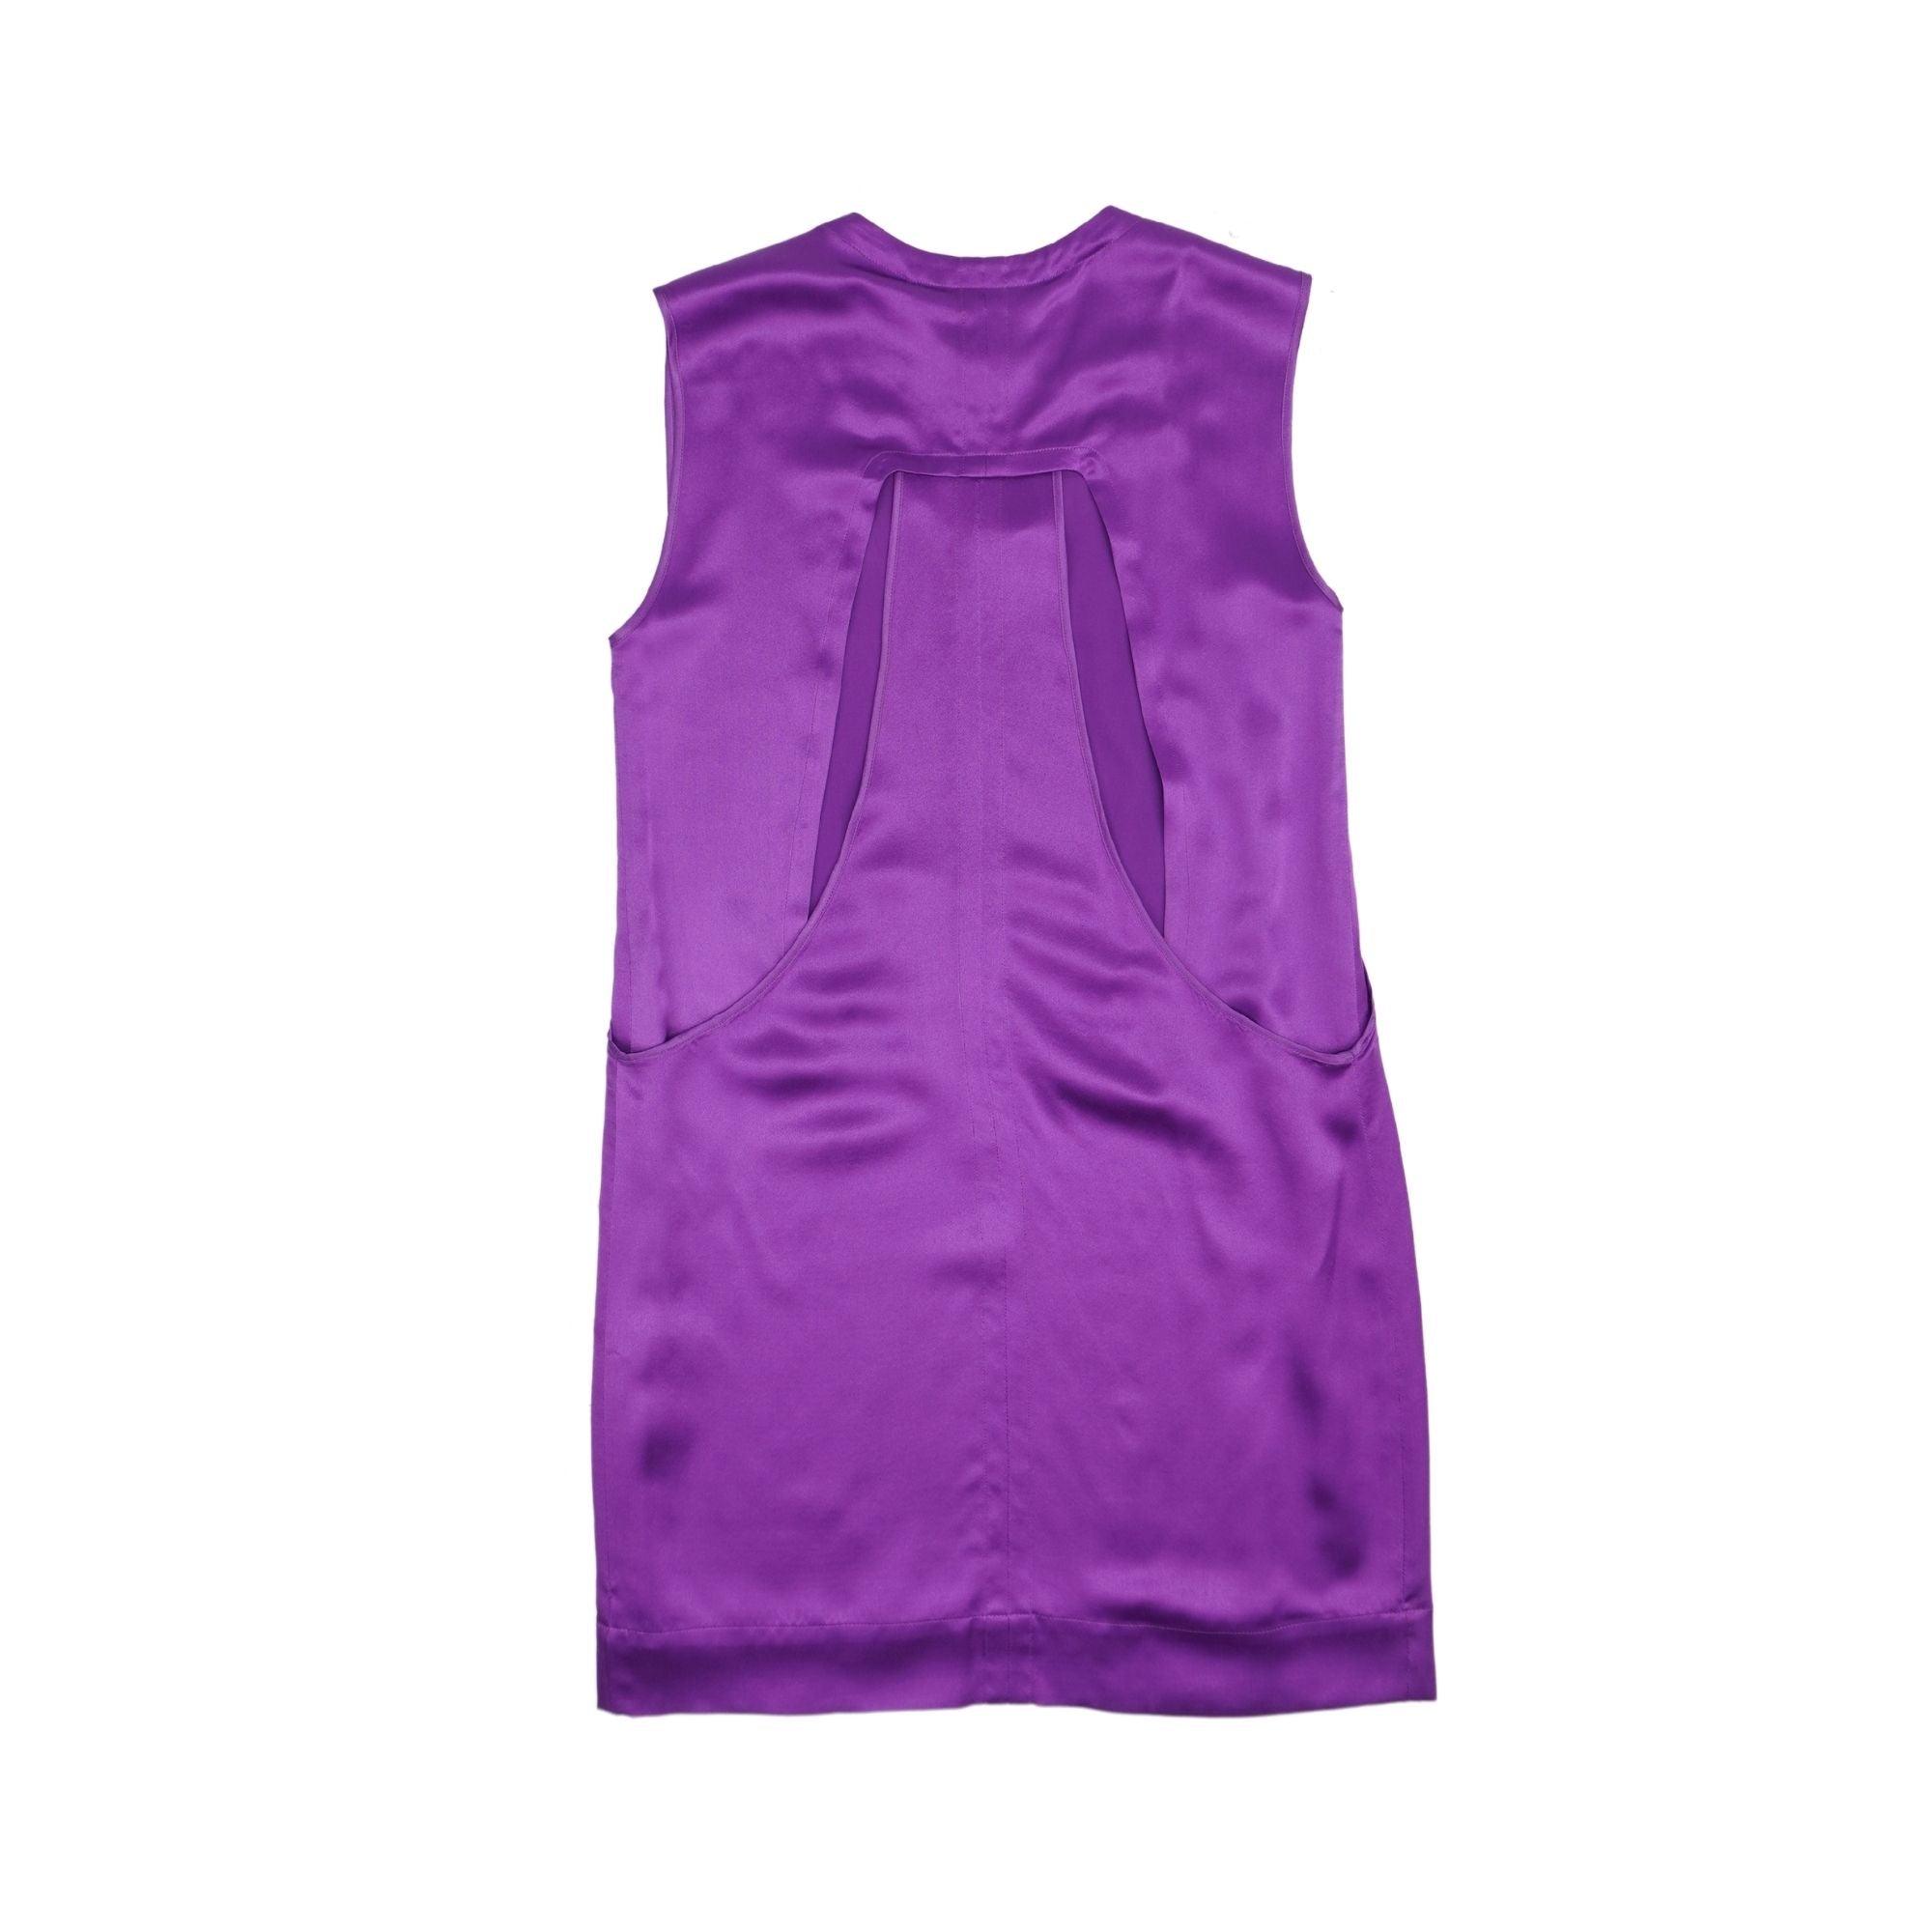 Helmut Lang Dress - Women's S - Fashionably Yours